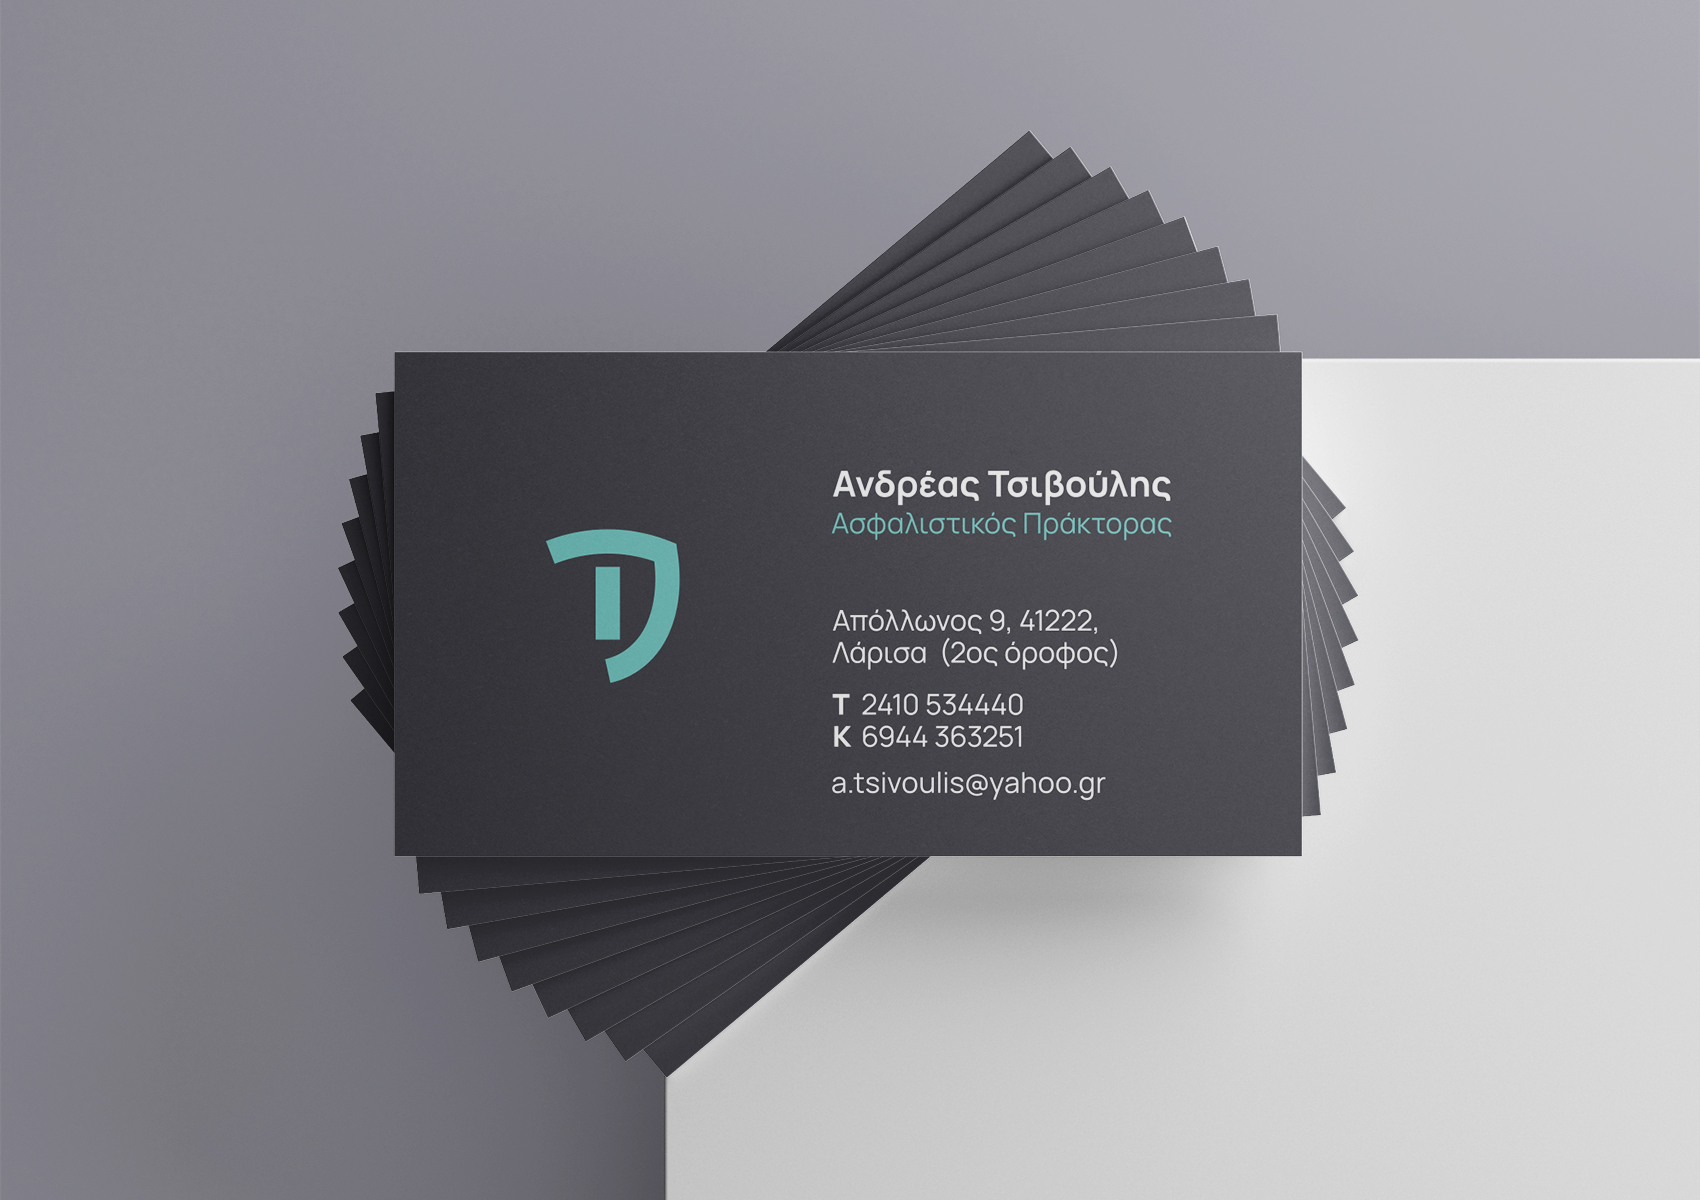 Andreas Tsivoulis business cards backside 1700x1200 by xhristakis